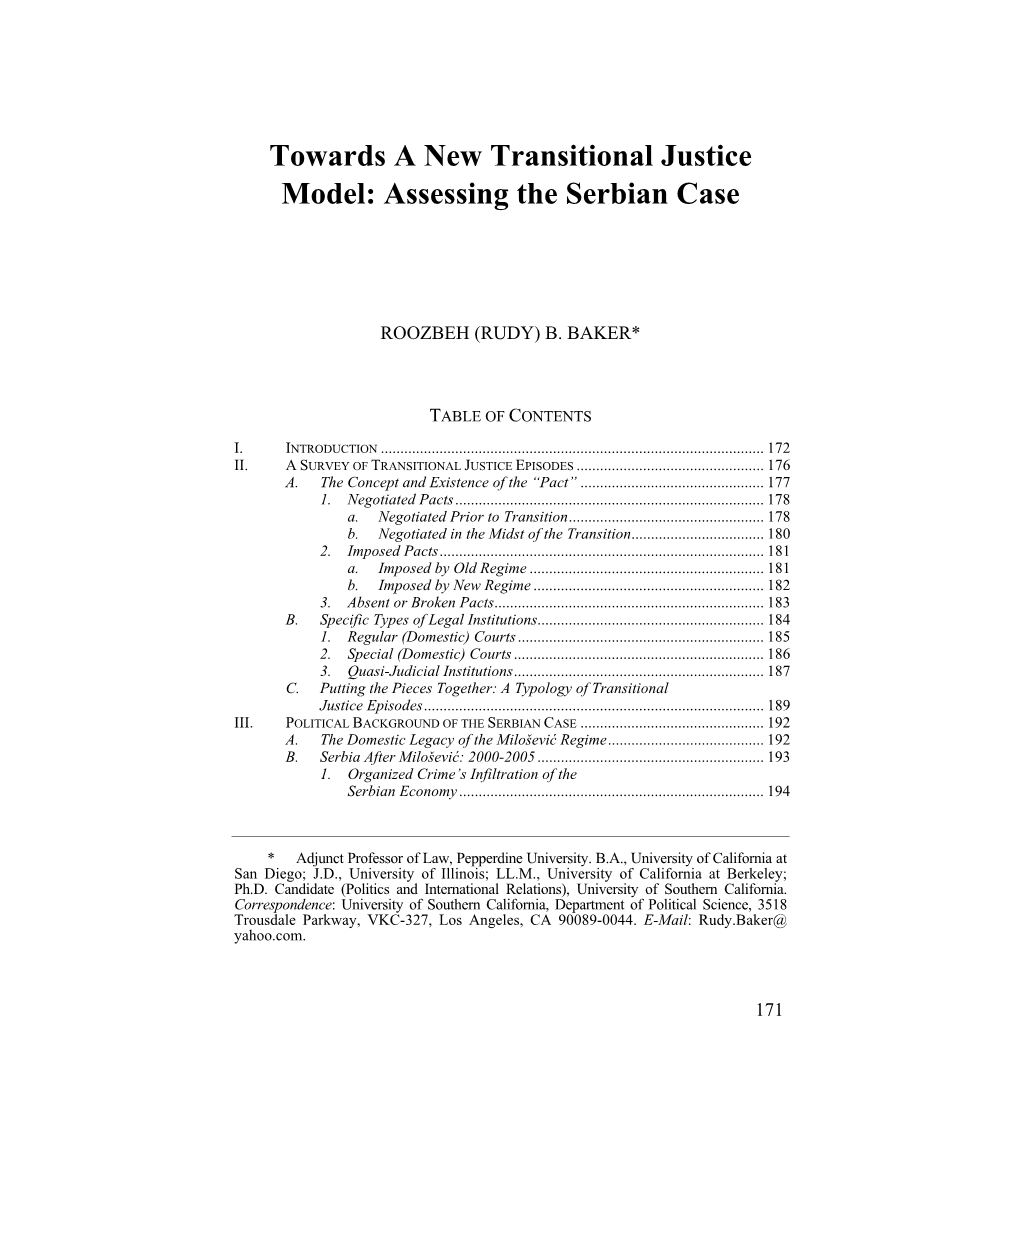 Towards a New Transitional Justice Model: Assessing the Serbian Case